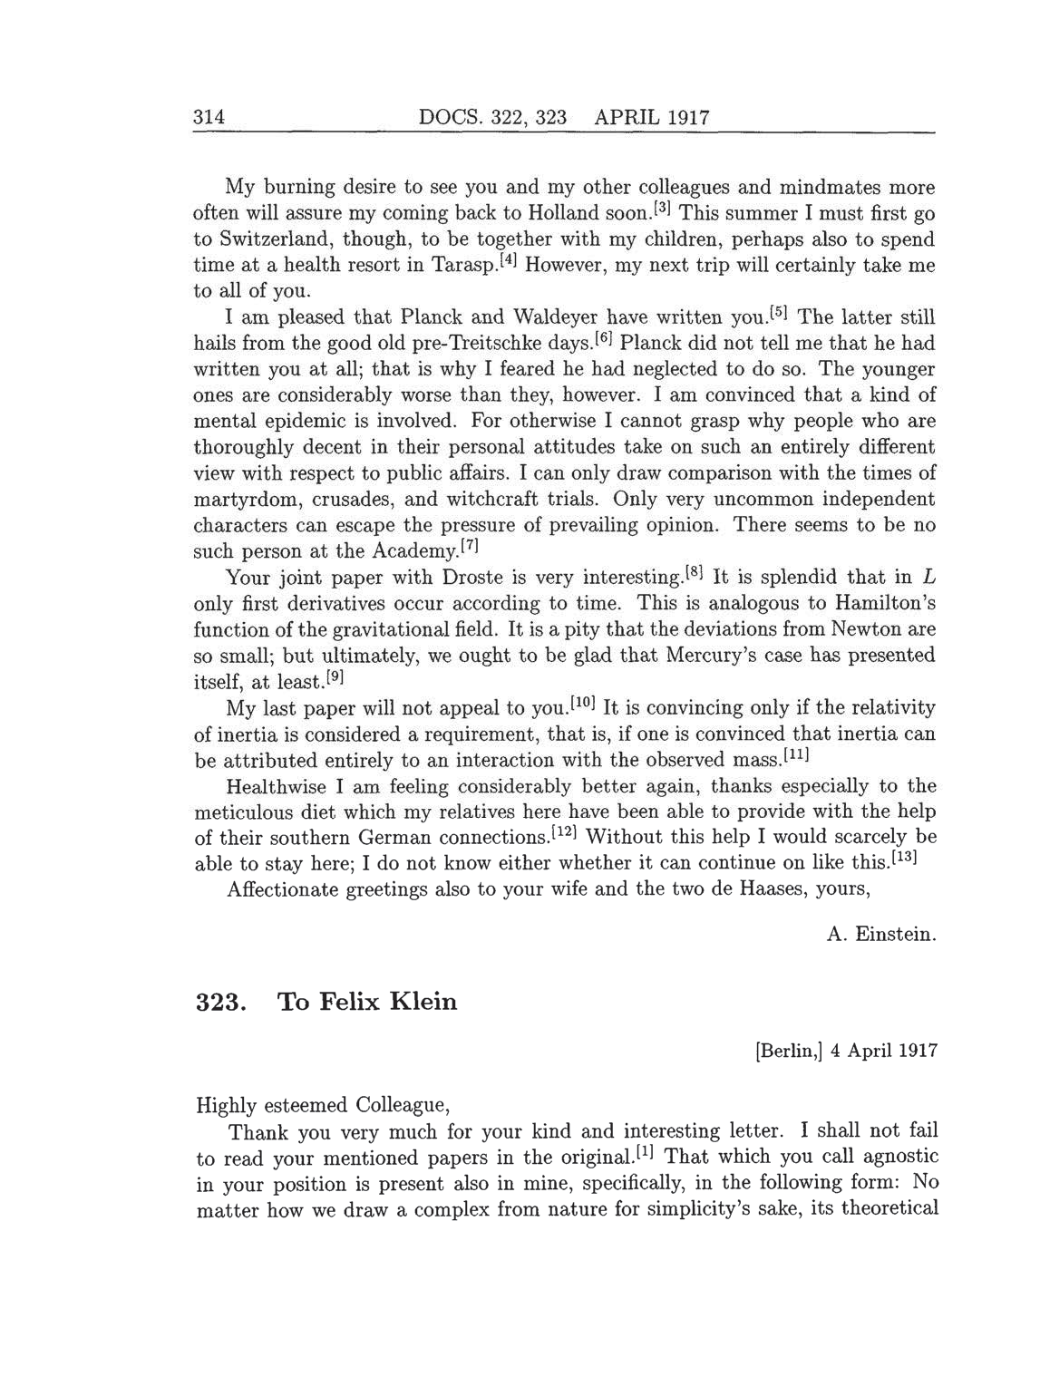 Volume 8: The Berlin Years: Correspondence, 1914-1918 (English translation supplement) page 314